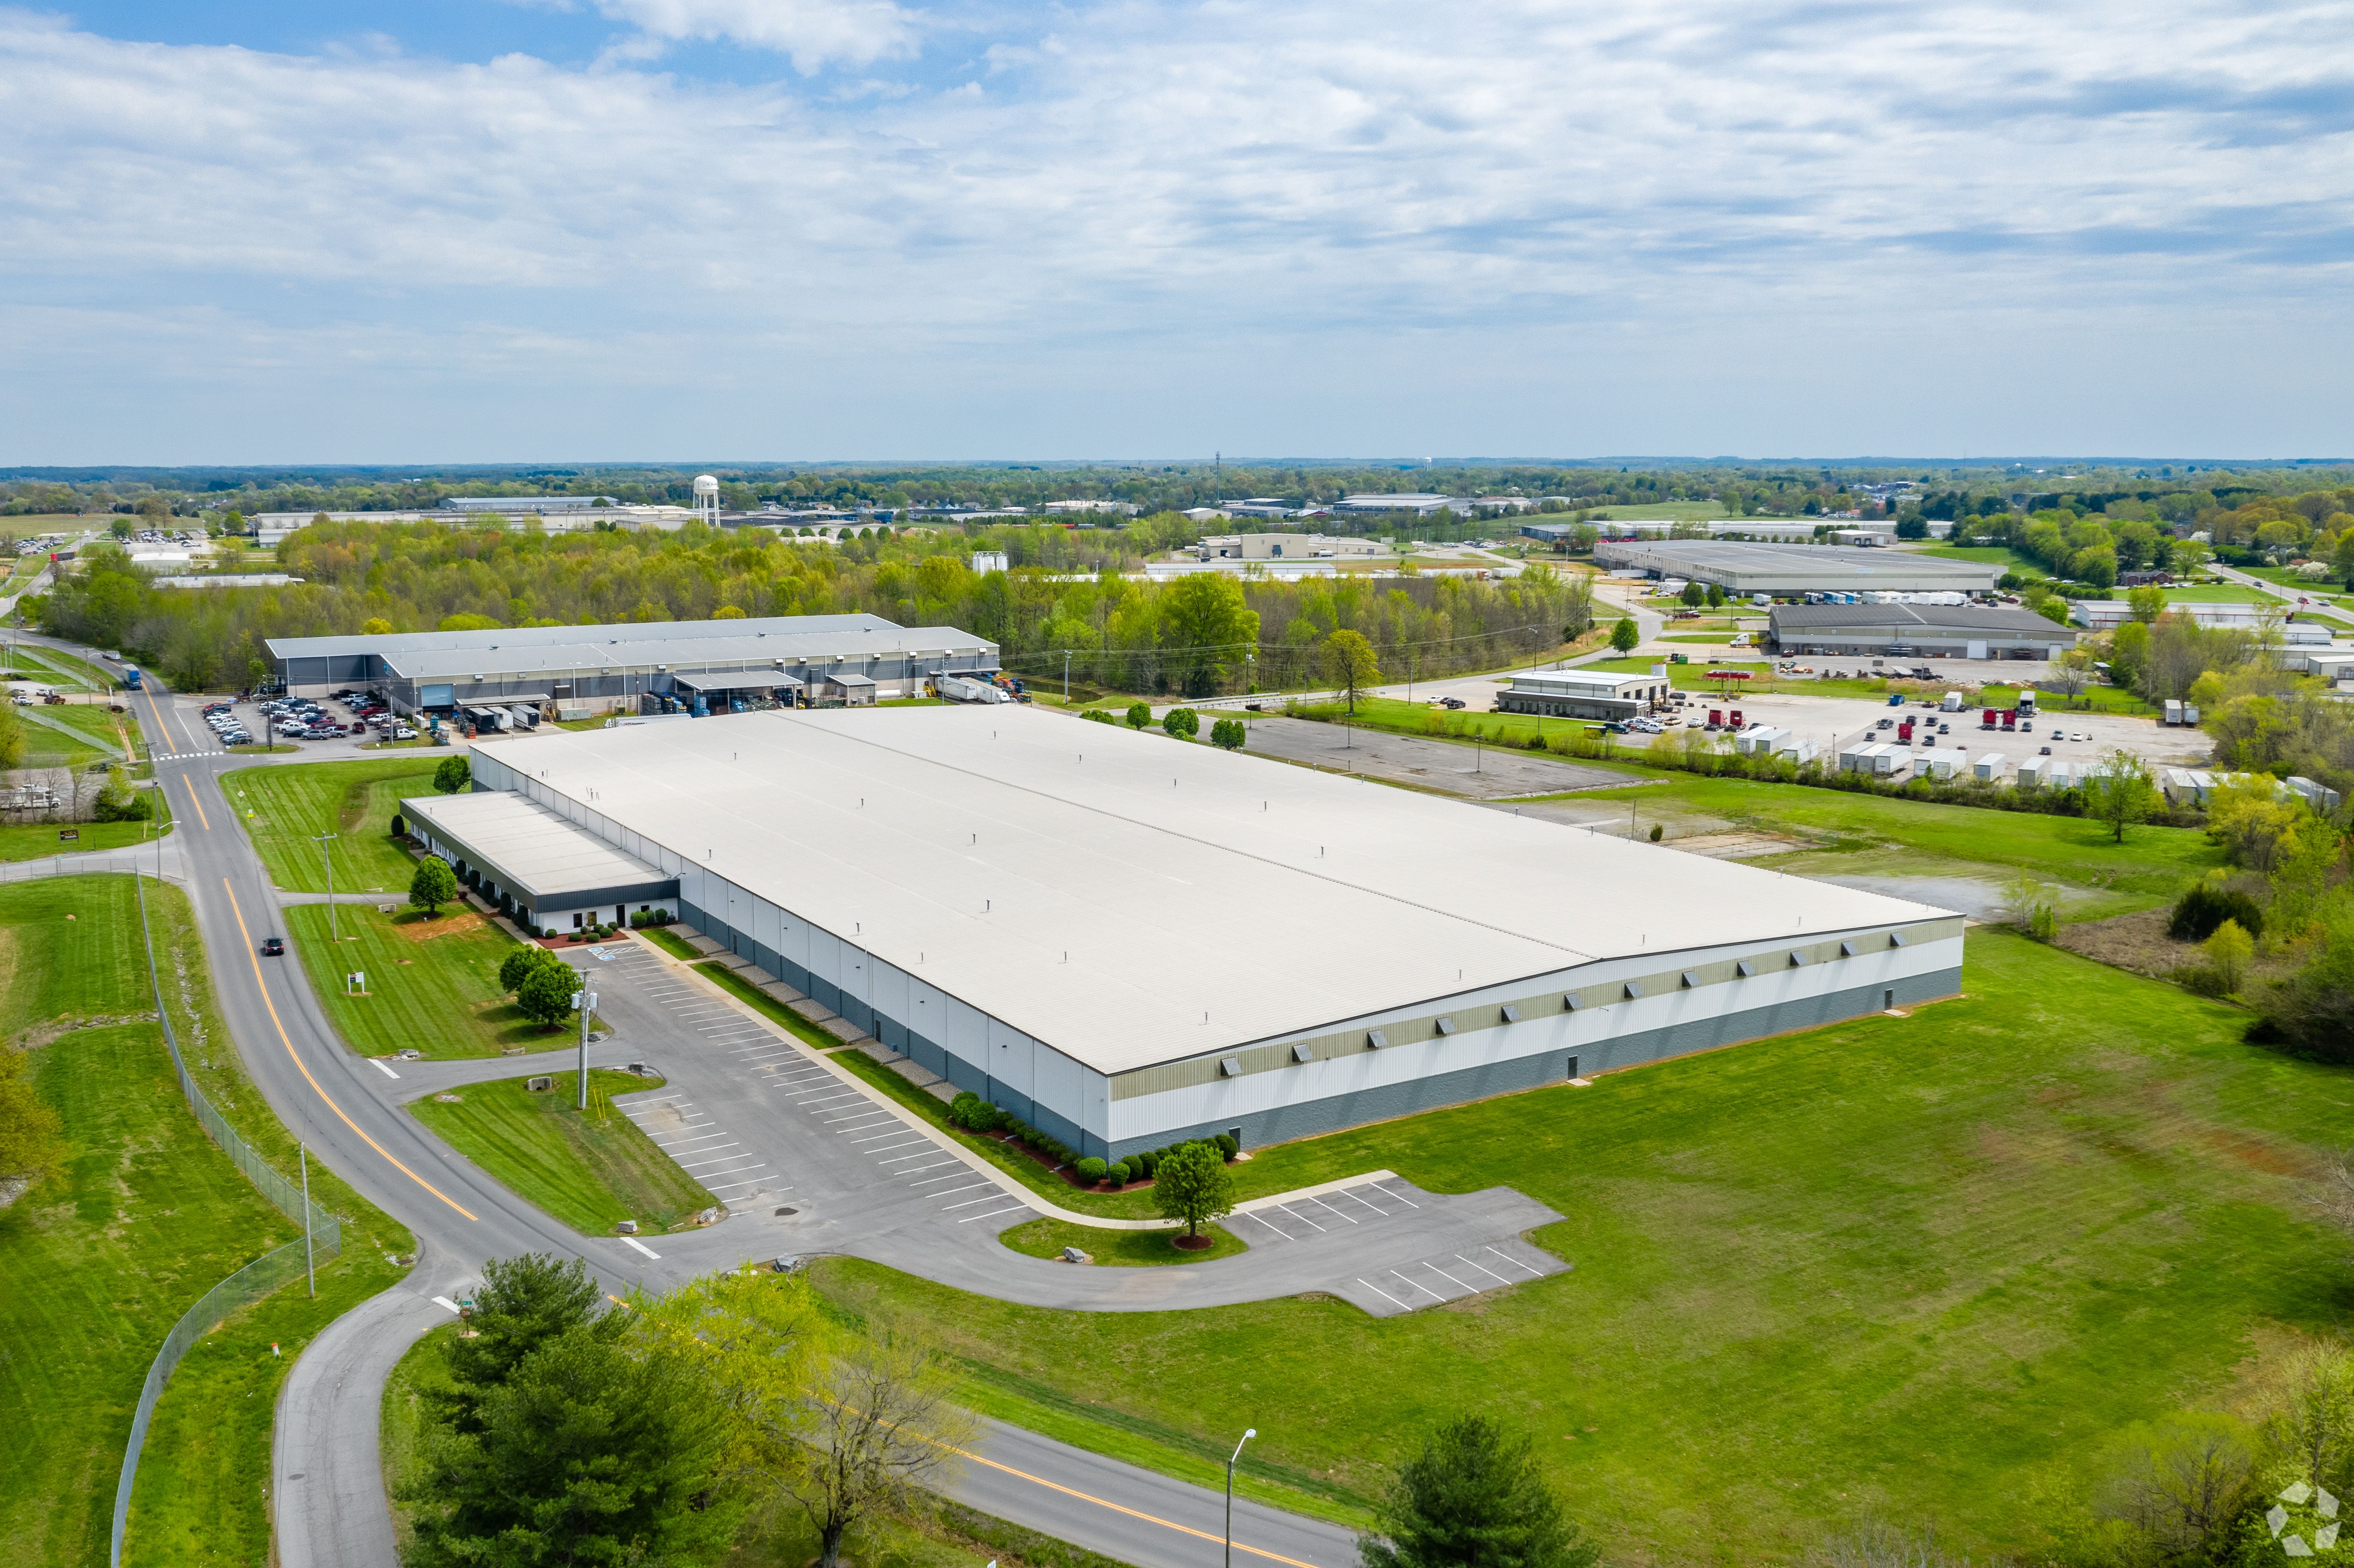 an aerial view shows the large Kirby industrial building. It is white, with lots of green grass surrounding.